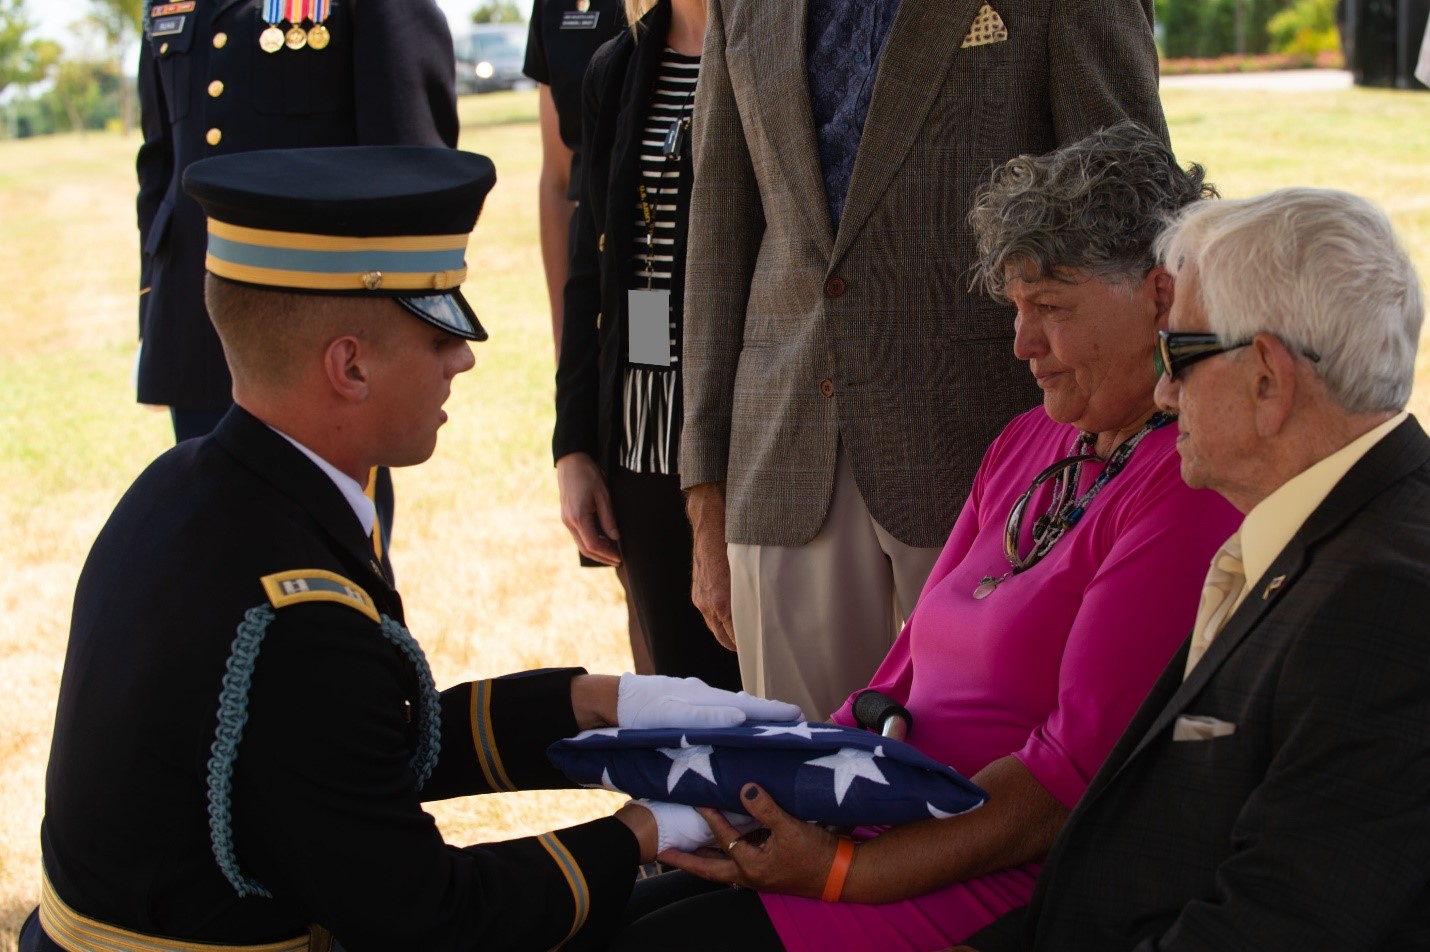 Goia Palmerio receives the American flag during the funeral for her father, Caesar Civitella, a special operations icon, at Arli